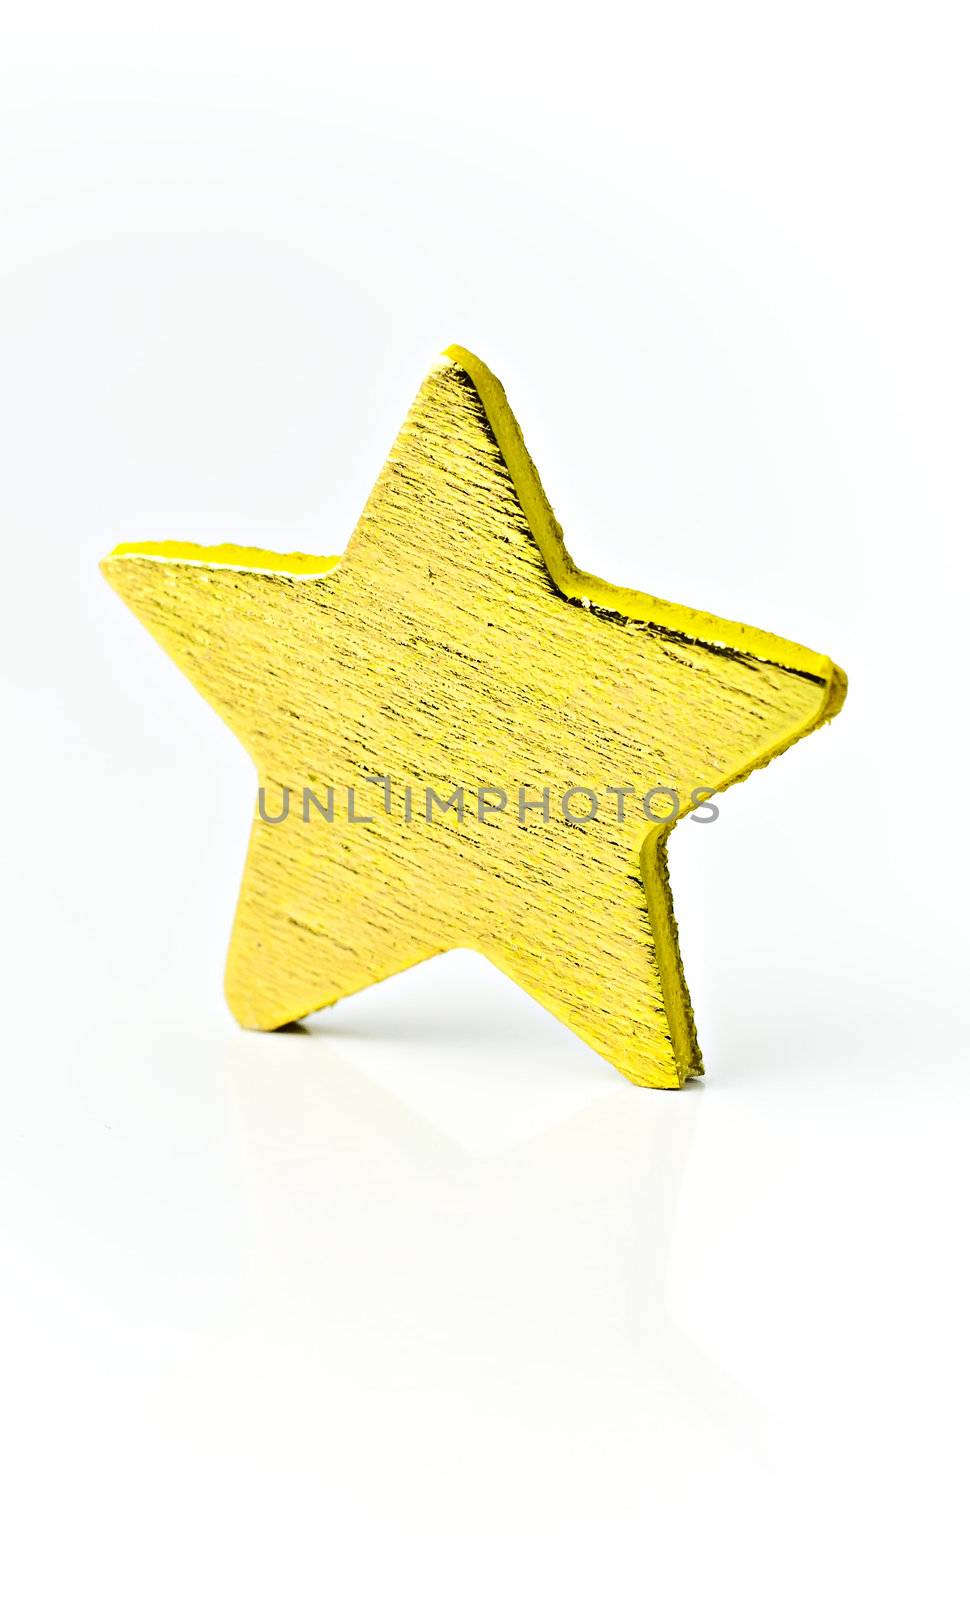 Isolated on white background a bright golden star.
